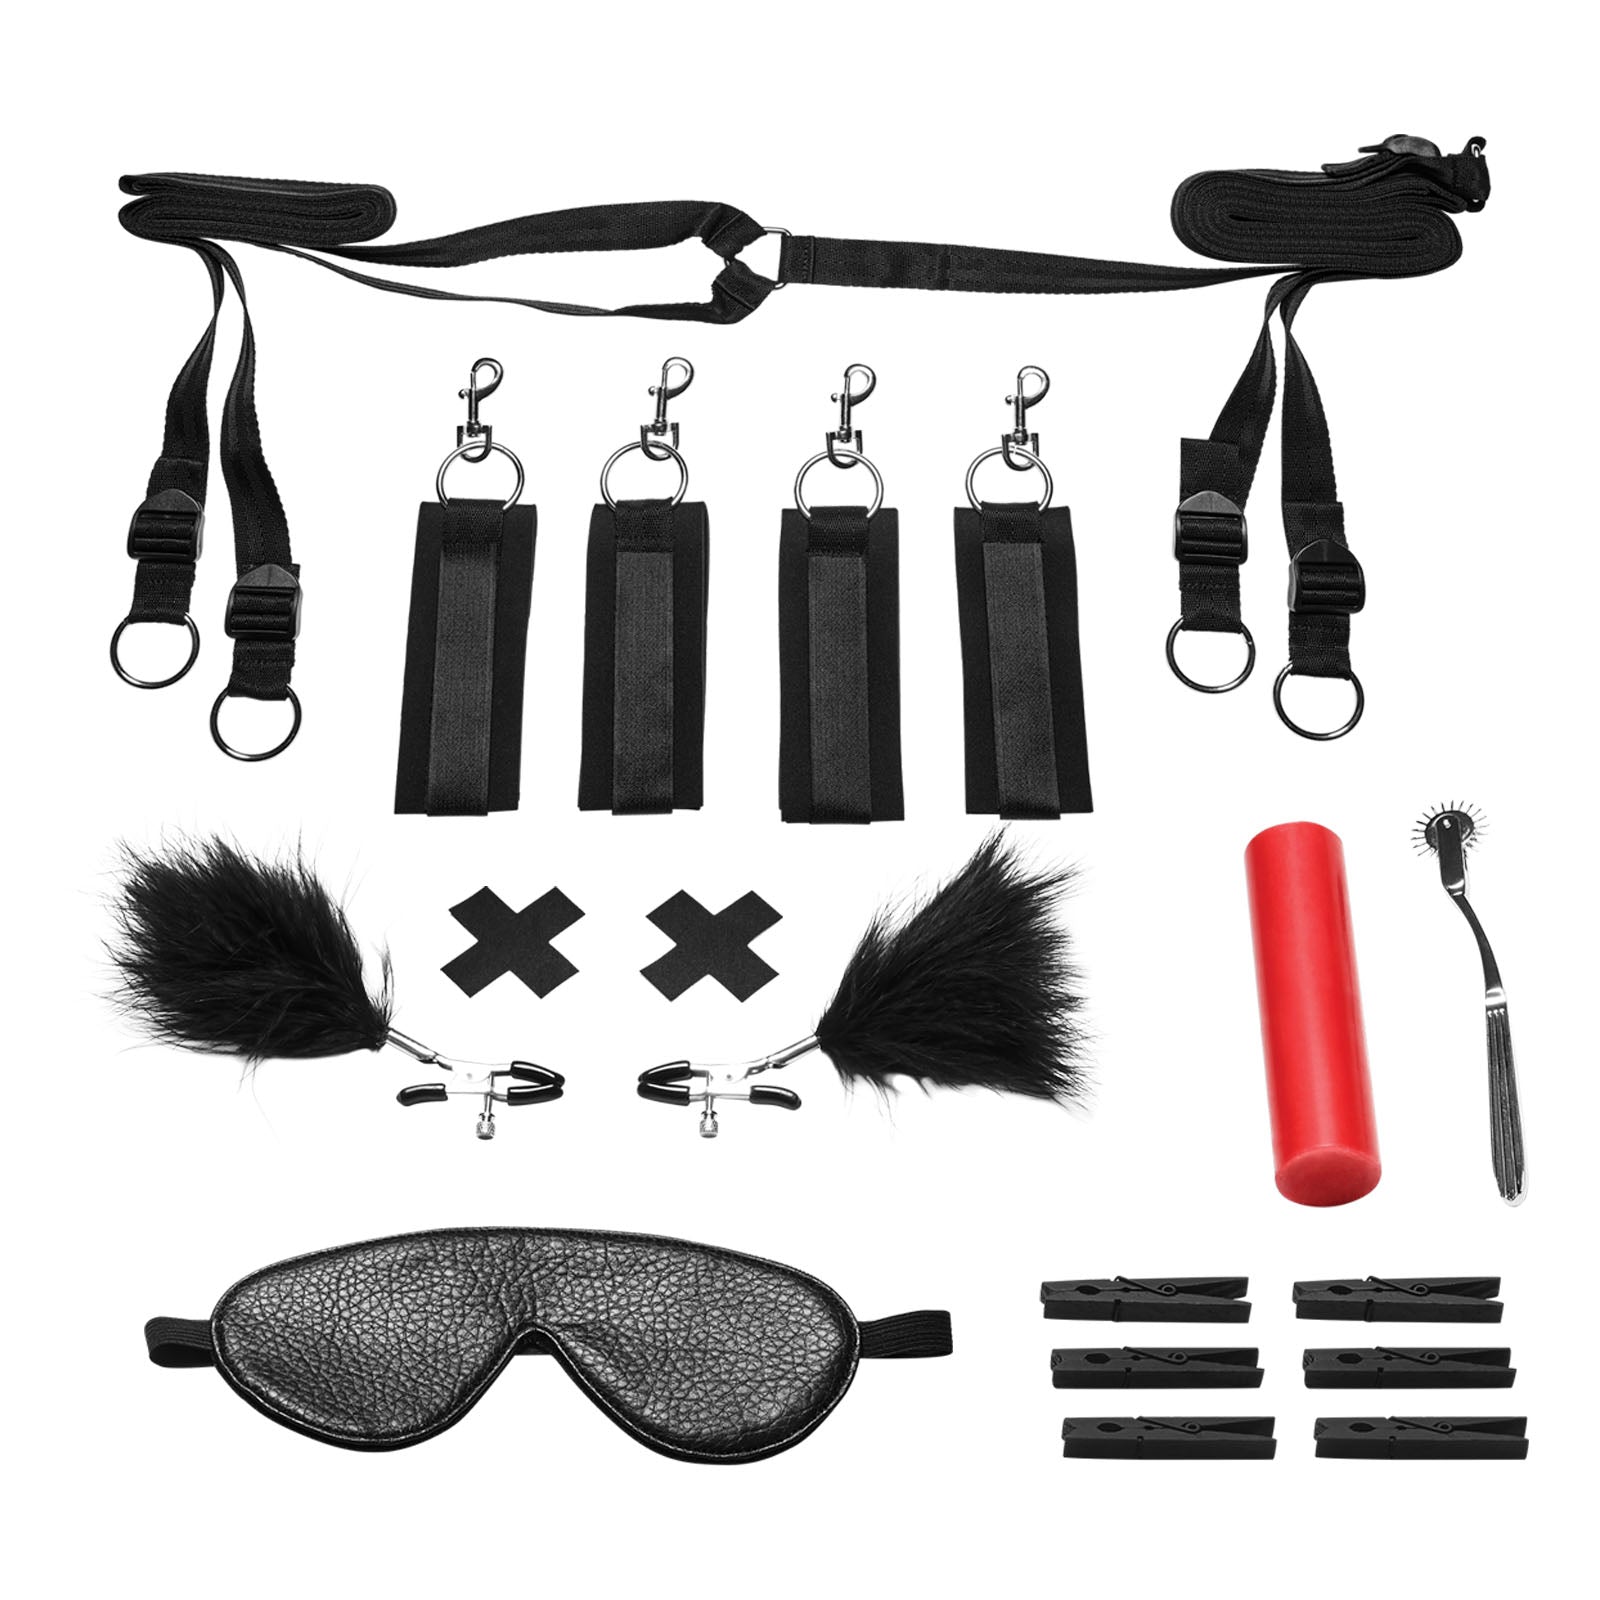 Everything included with the Lux Fetish Sensory Experience 7PC Bedspreader and Bed Restraint Set with Wartenberg Pinwheel at glastoy.com